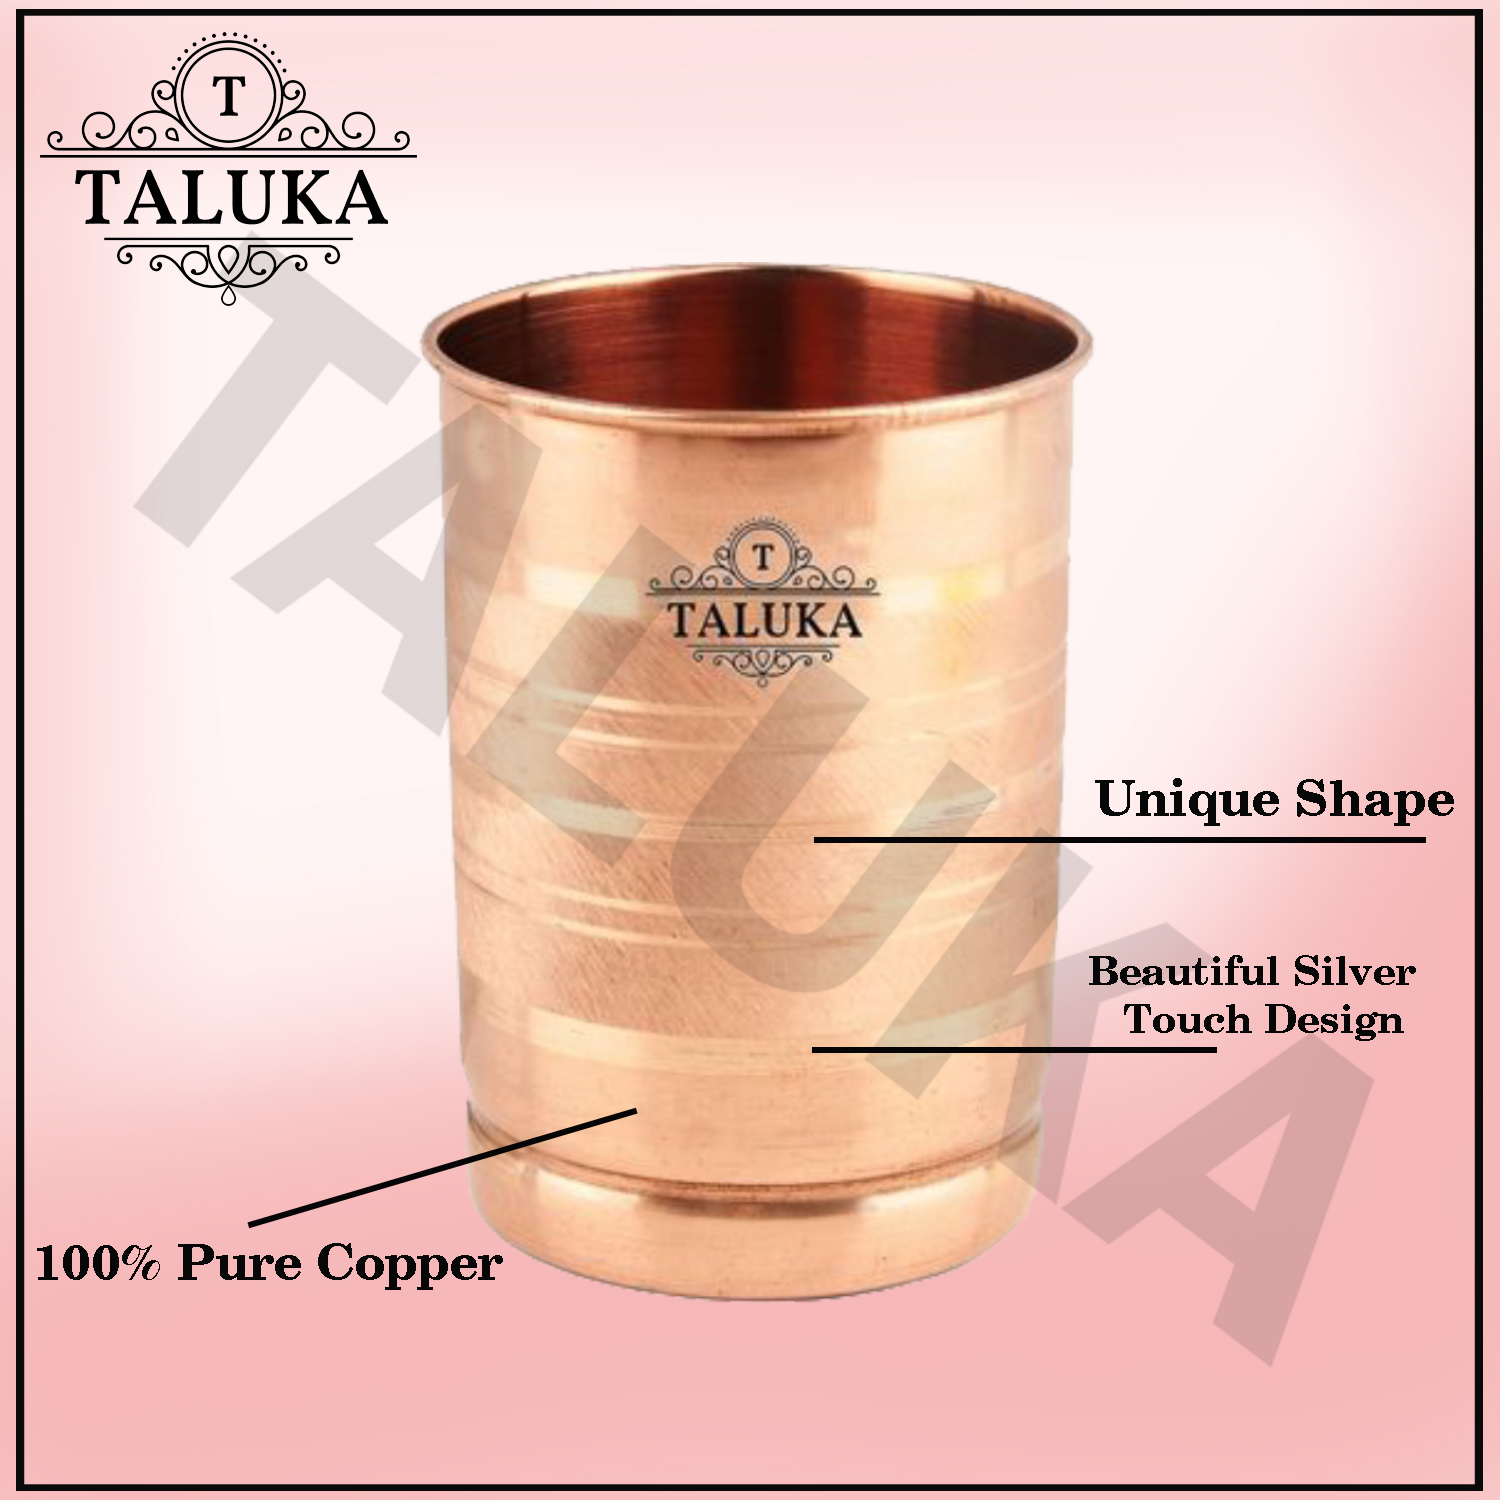 Pure Copper Glass Tumbler, Set of 1, 300 ML for Storage and Drinking Purpose For Ayurveda Good Health Benefits ( 3" x 4" inches ) Hotel Restaurant Home Drink Ware Glass